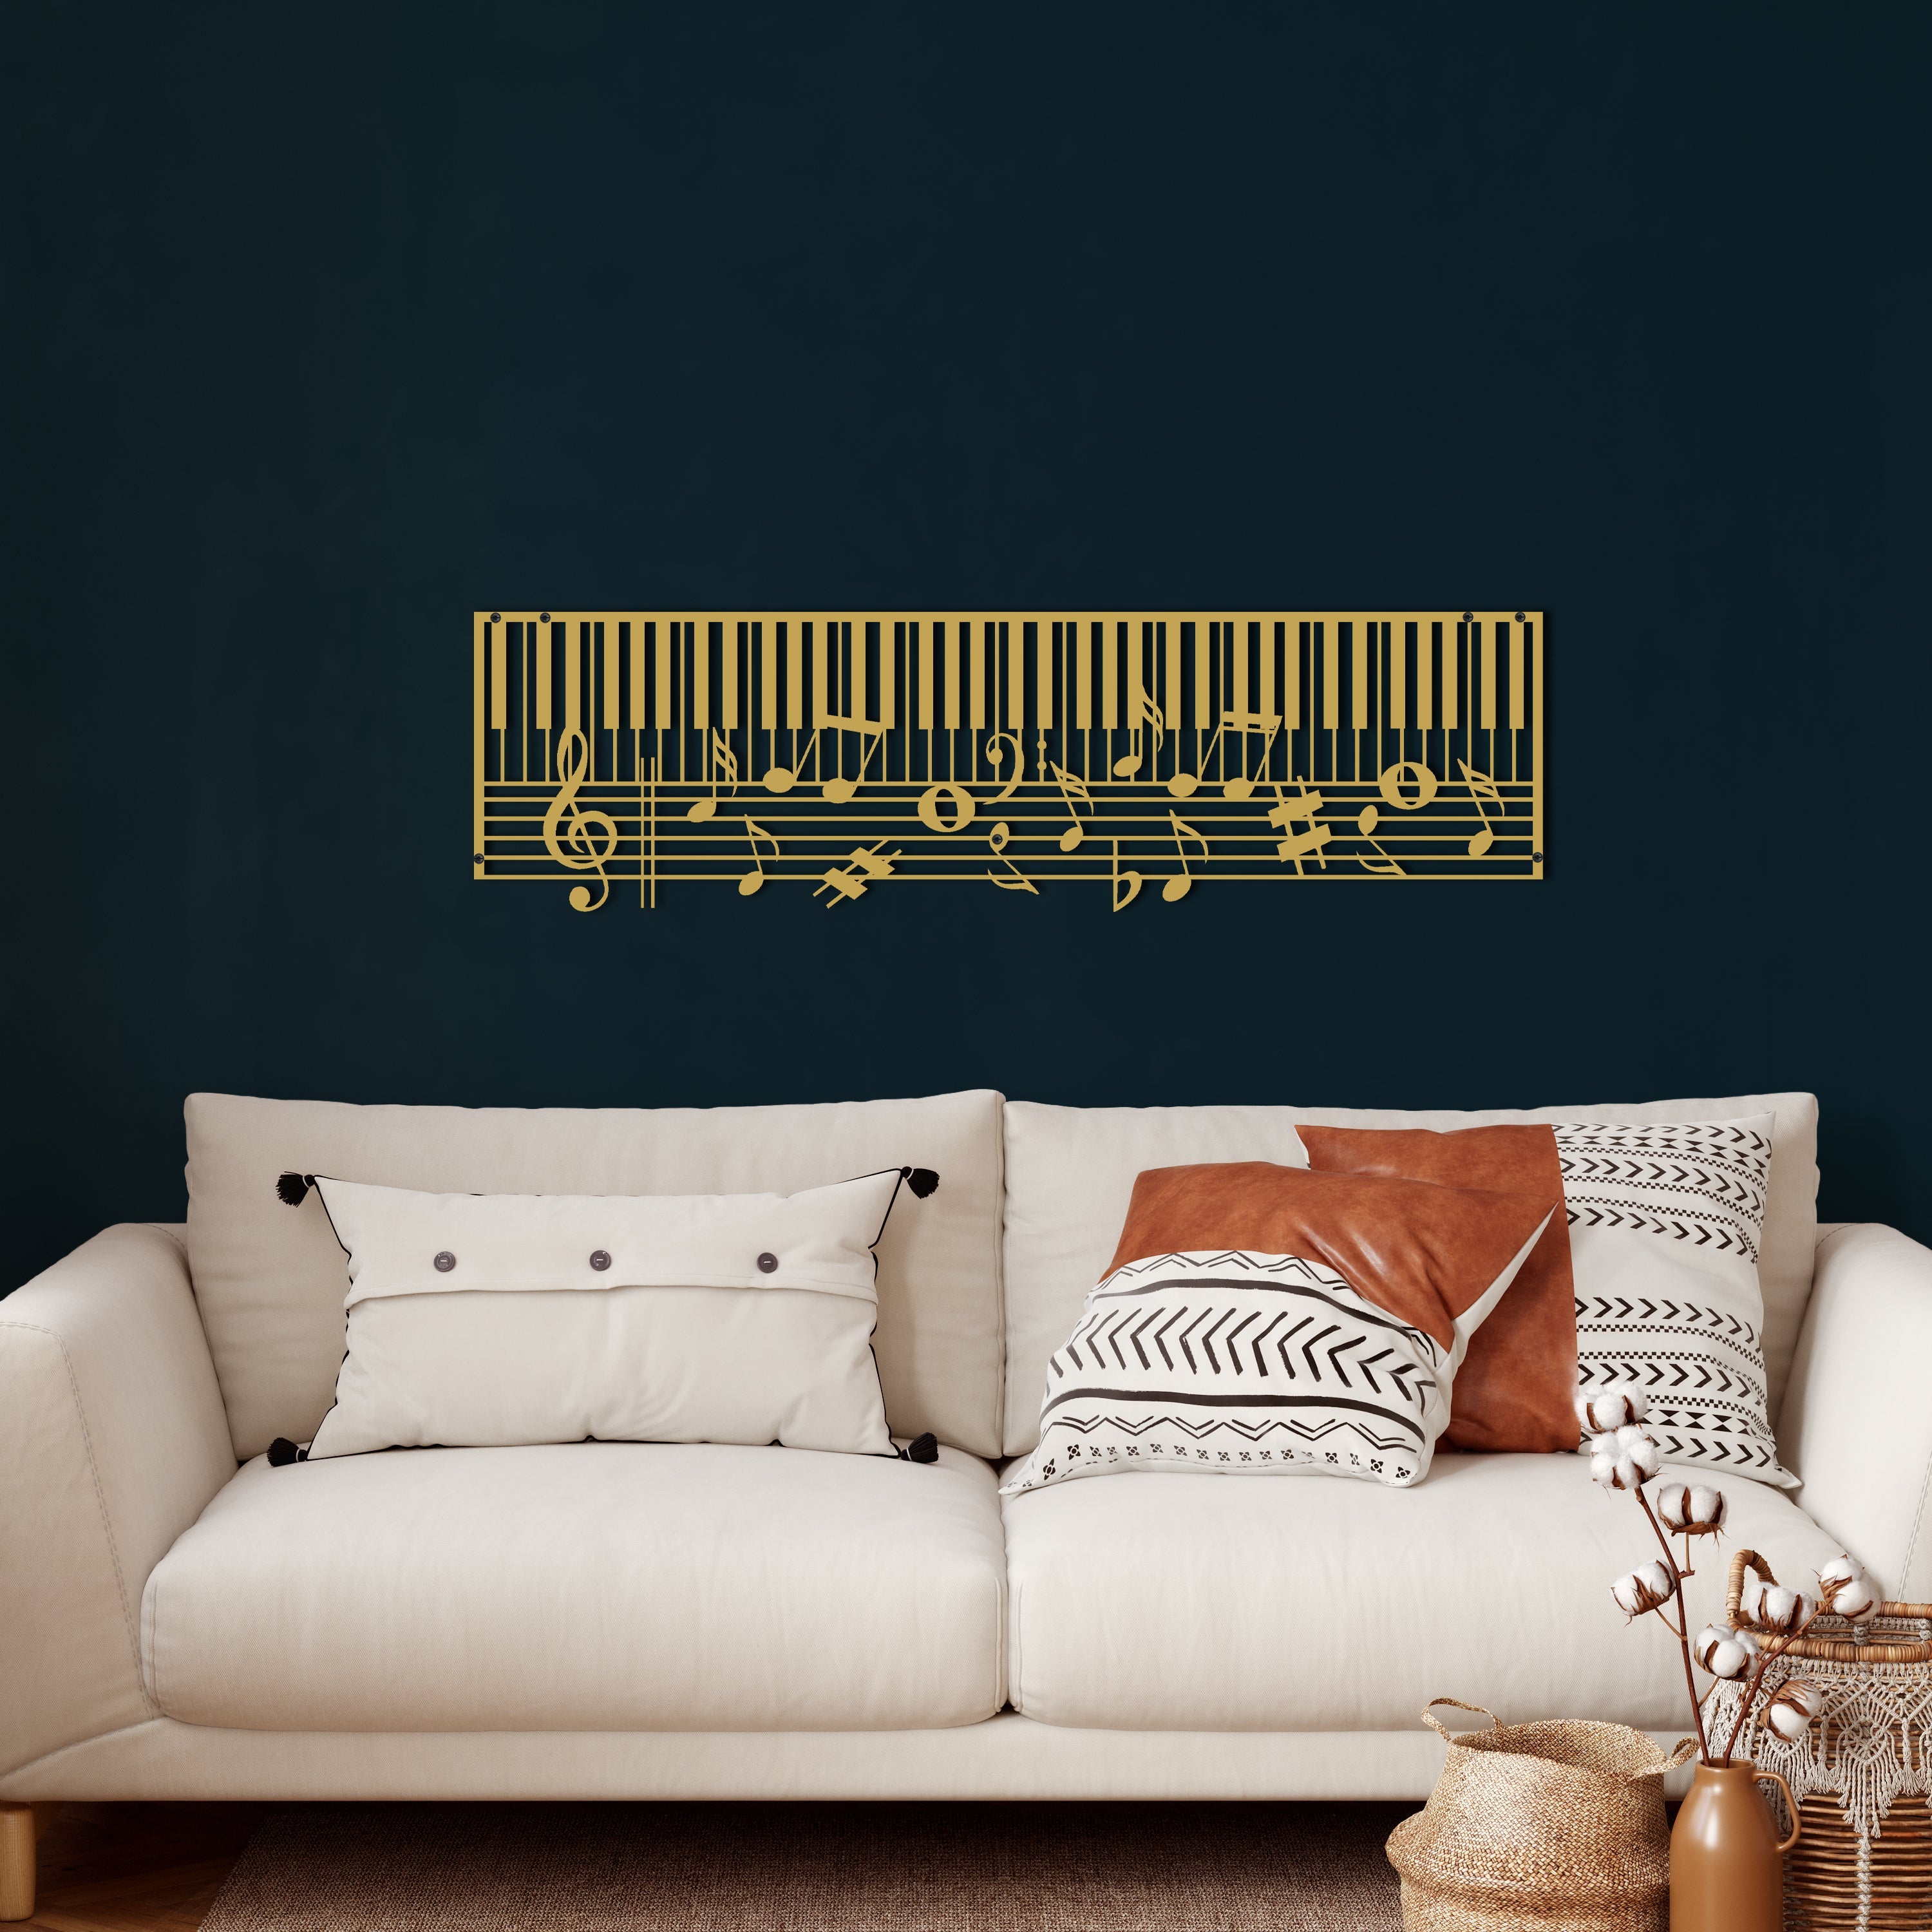 Piano Metal Wall Decoration with Notes